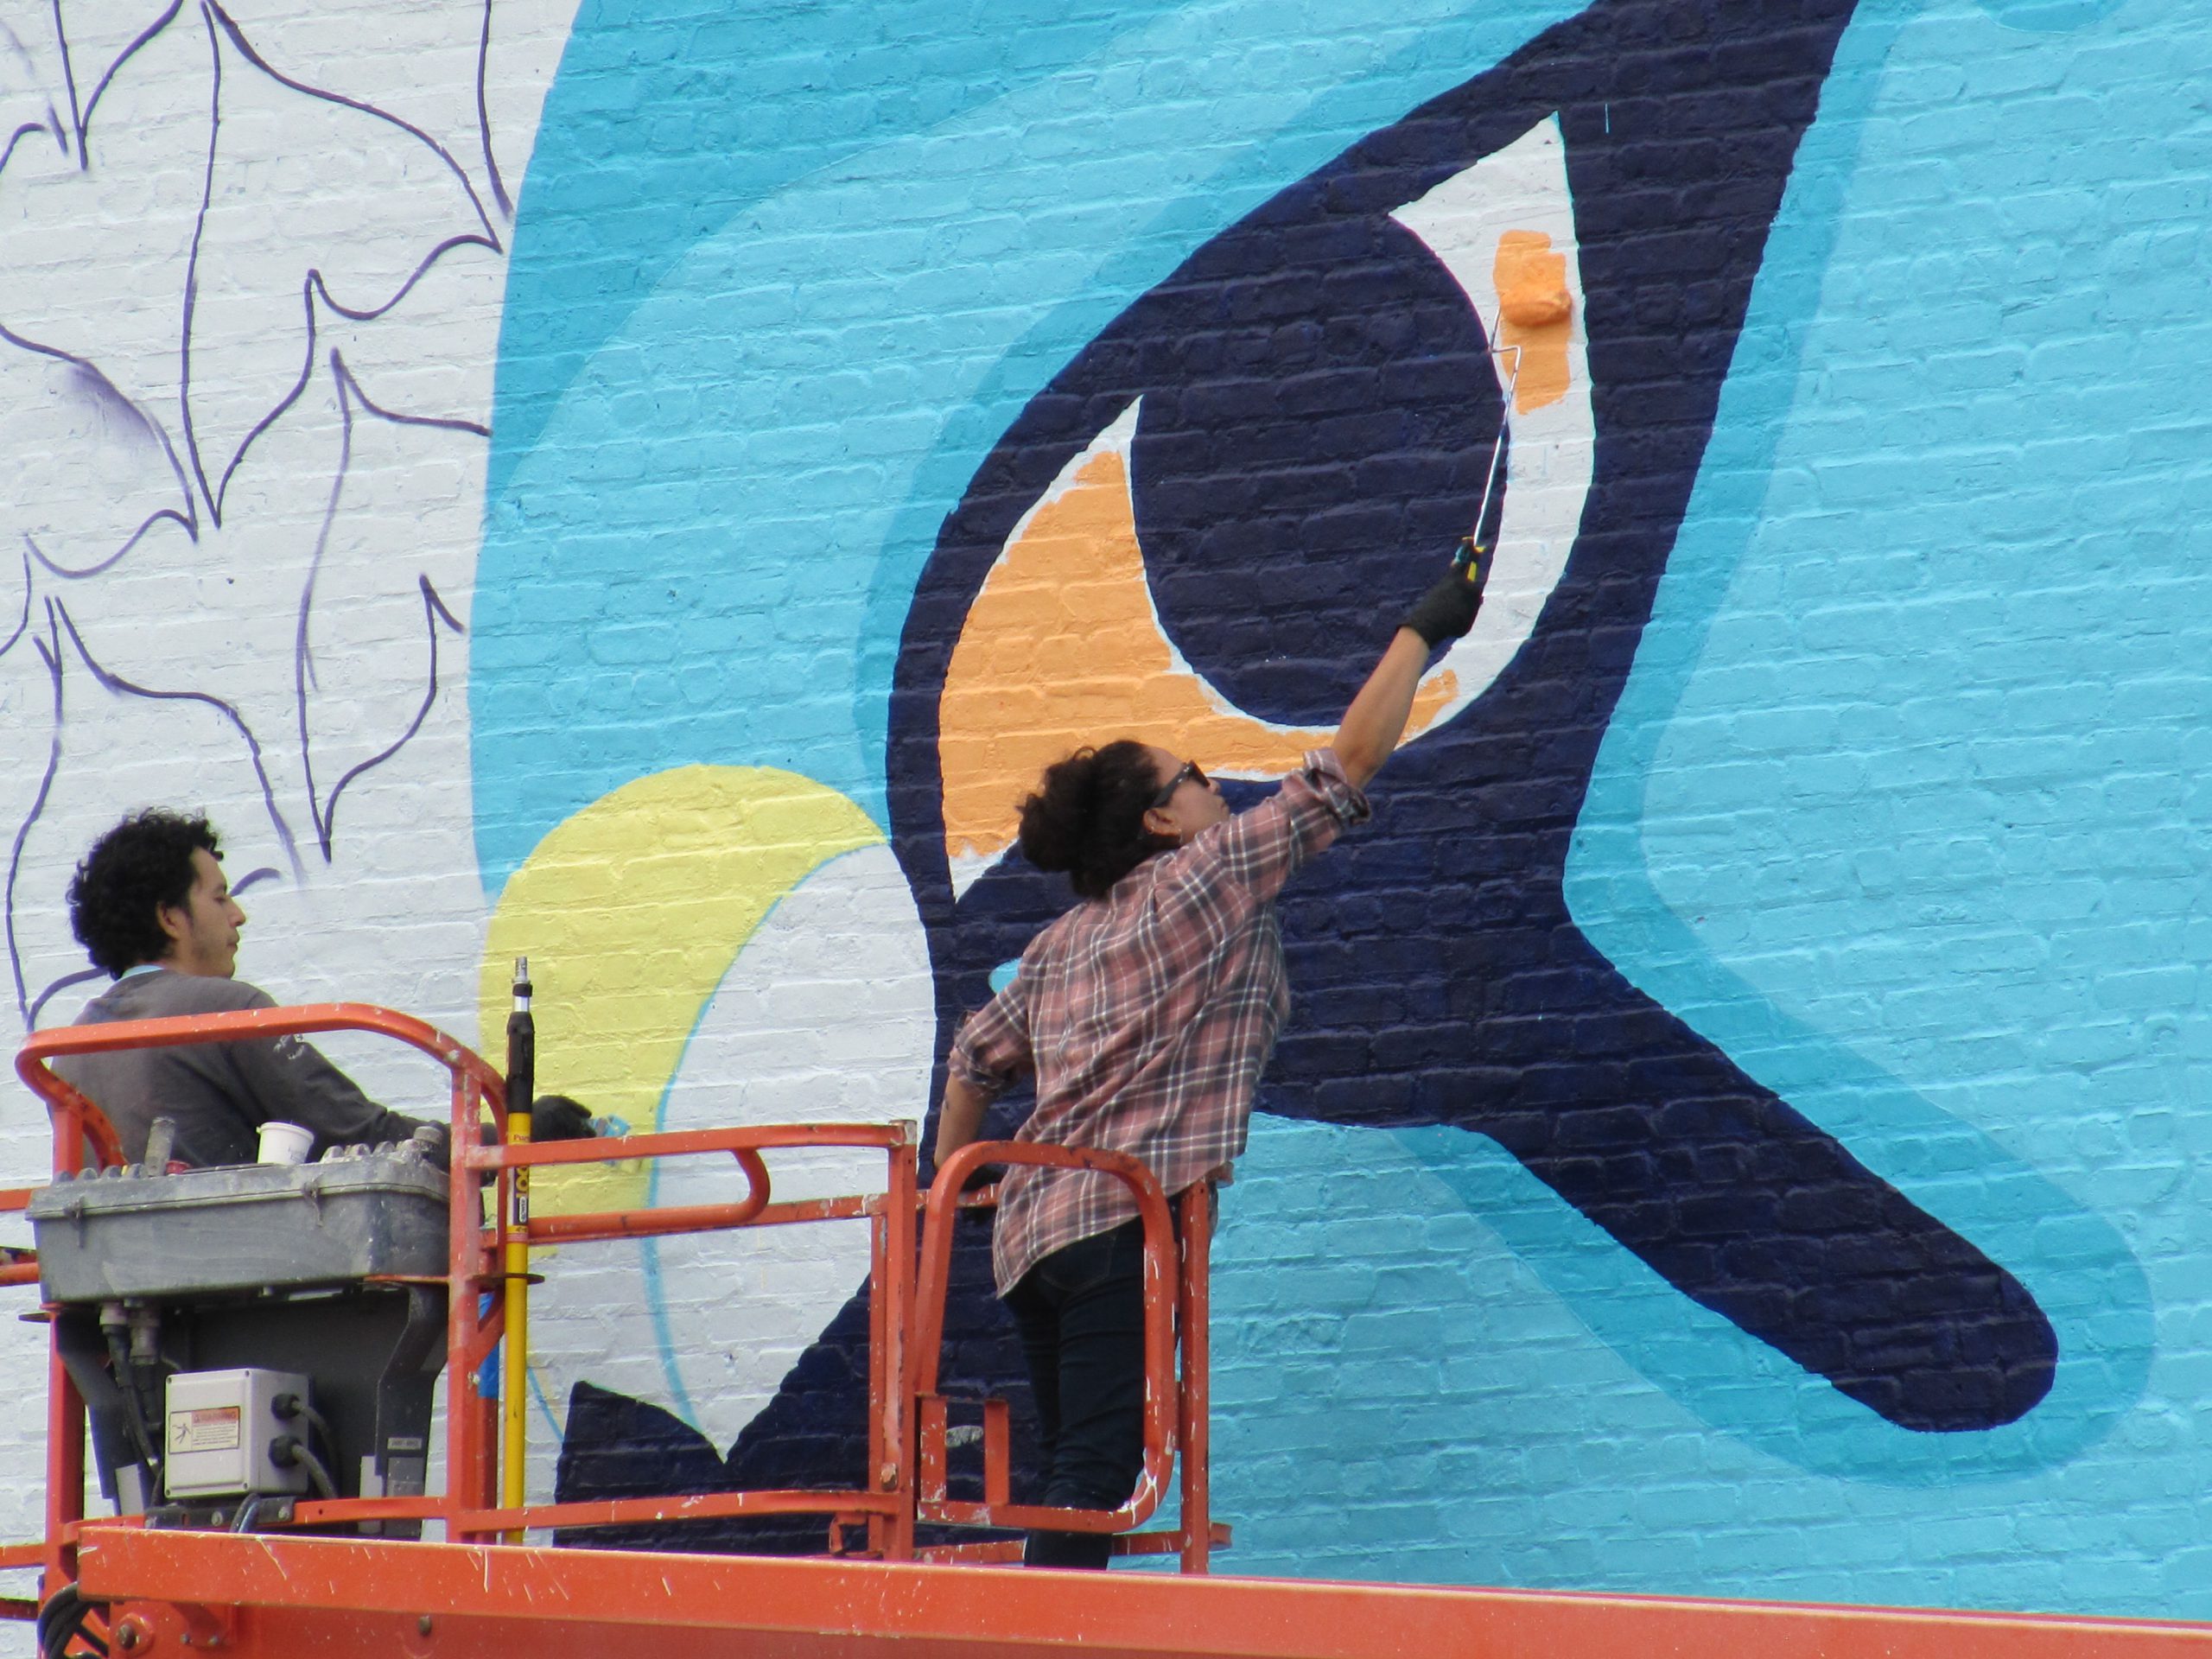 A woman on a lift paints a giant falcon eye with a roller